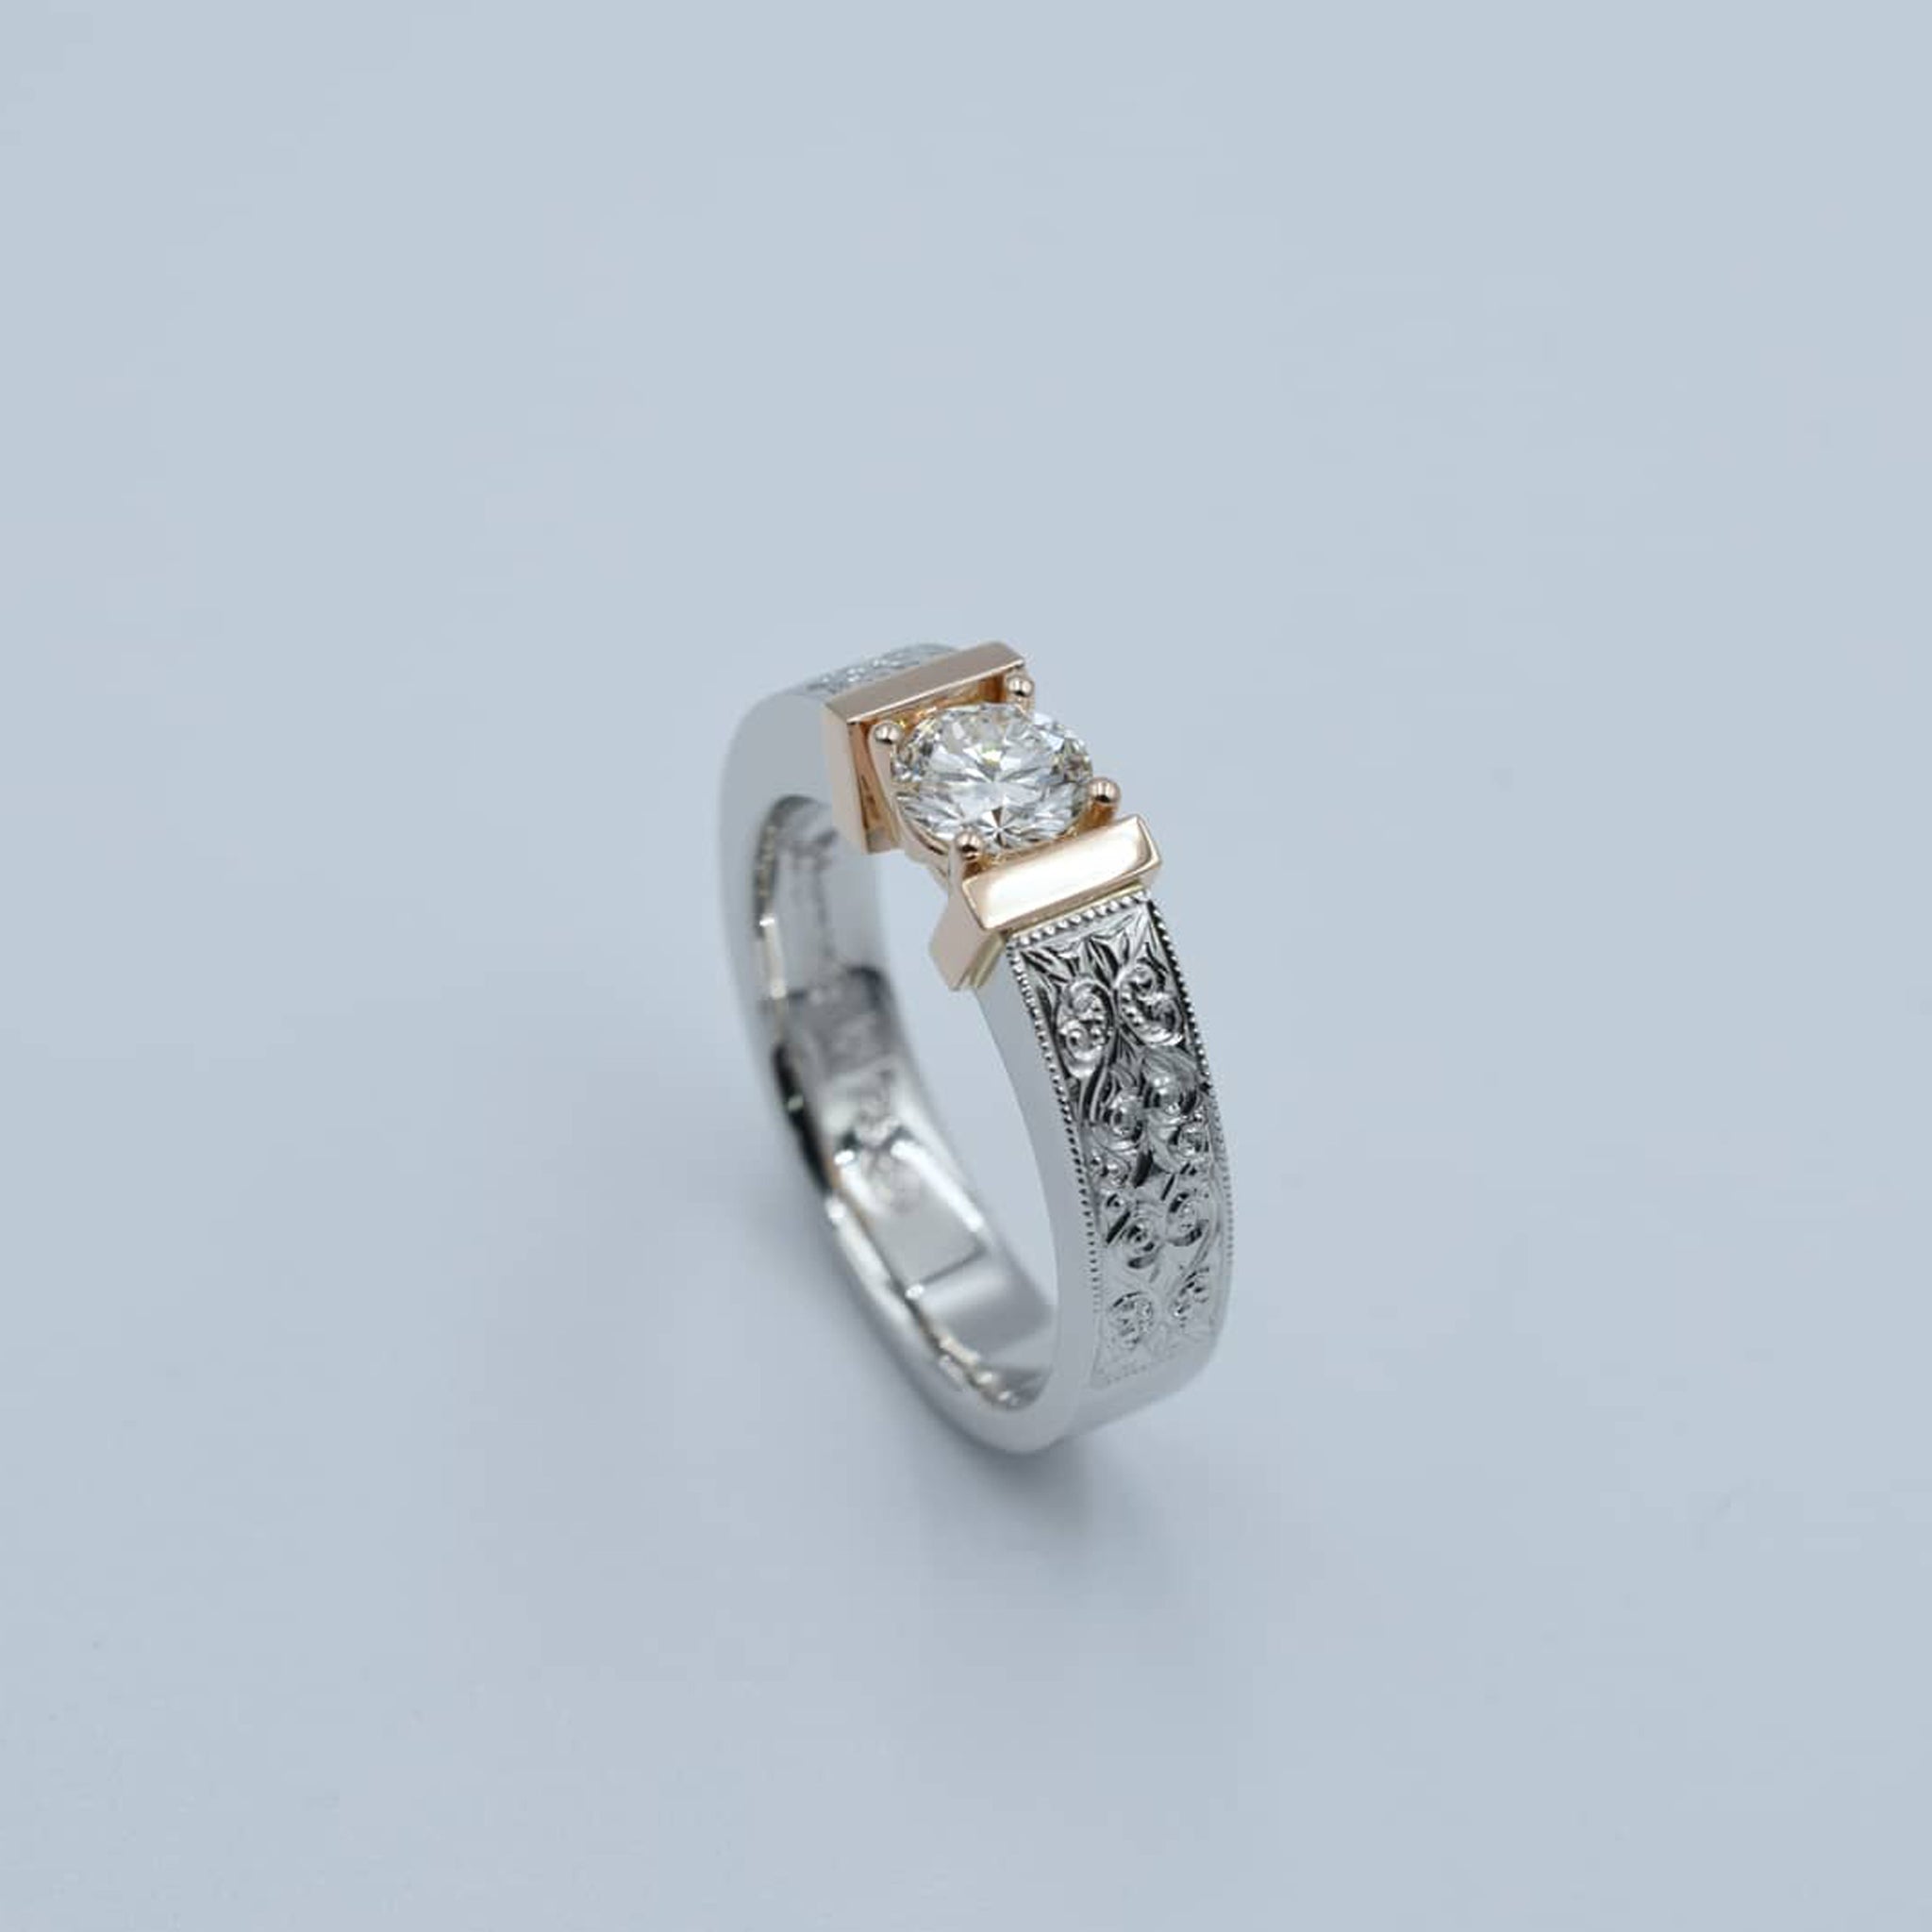 Platinum & 18K rose gold diamond solitaire with fine hand-engraved side detail